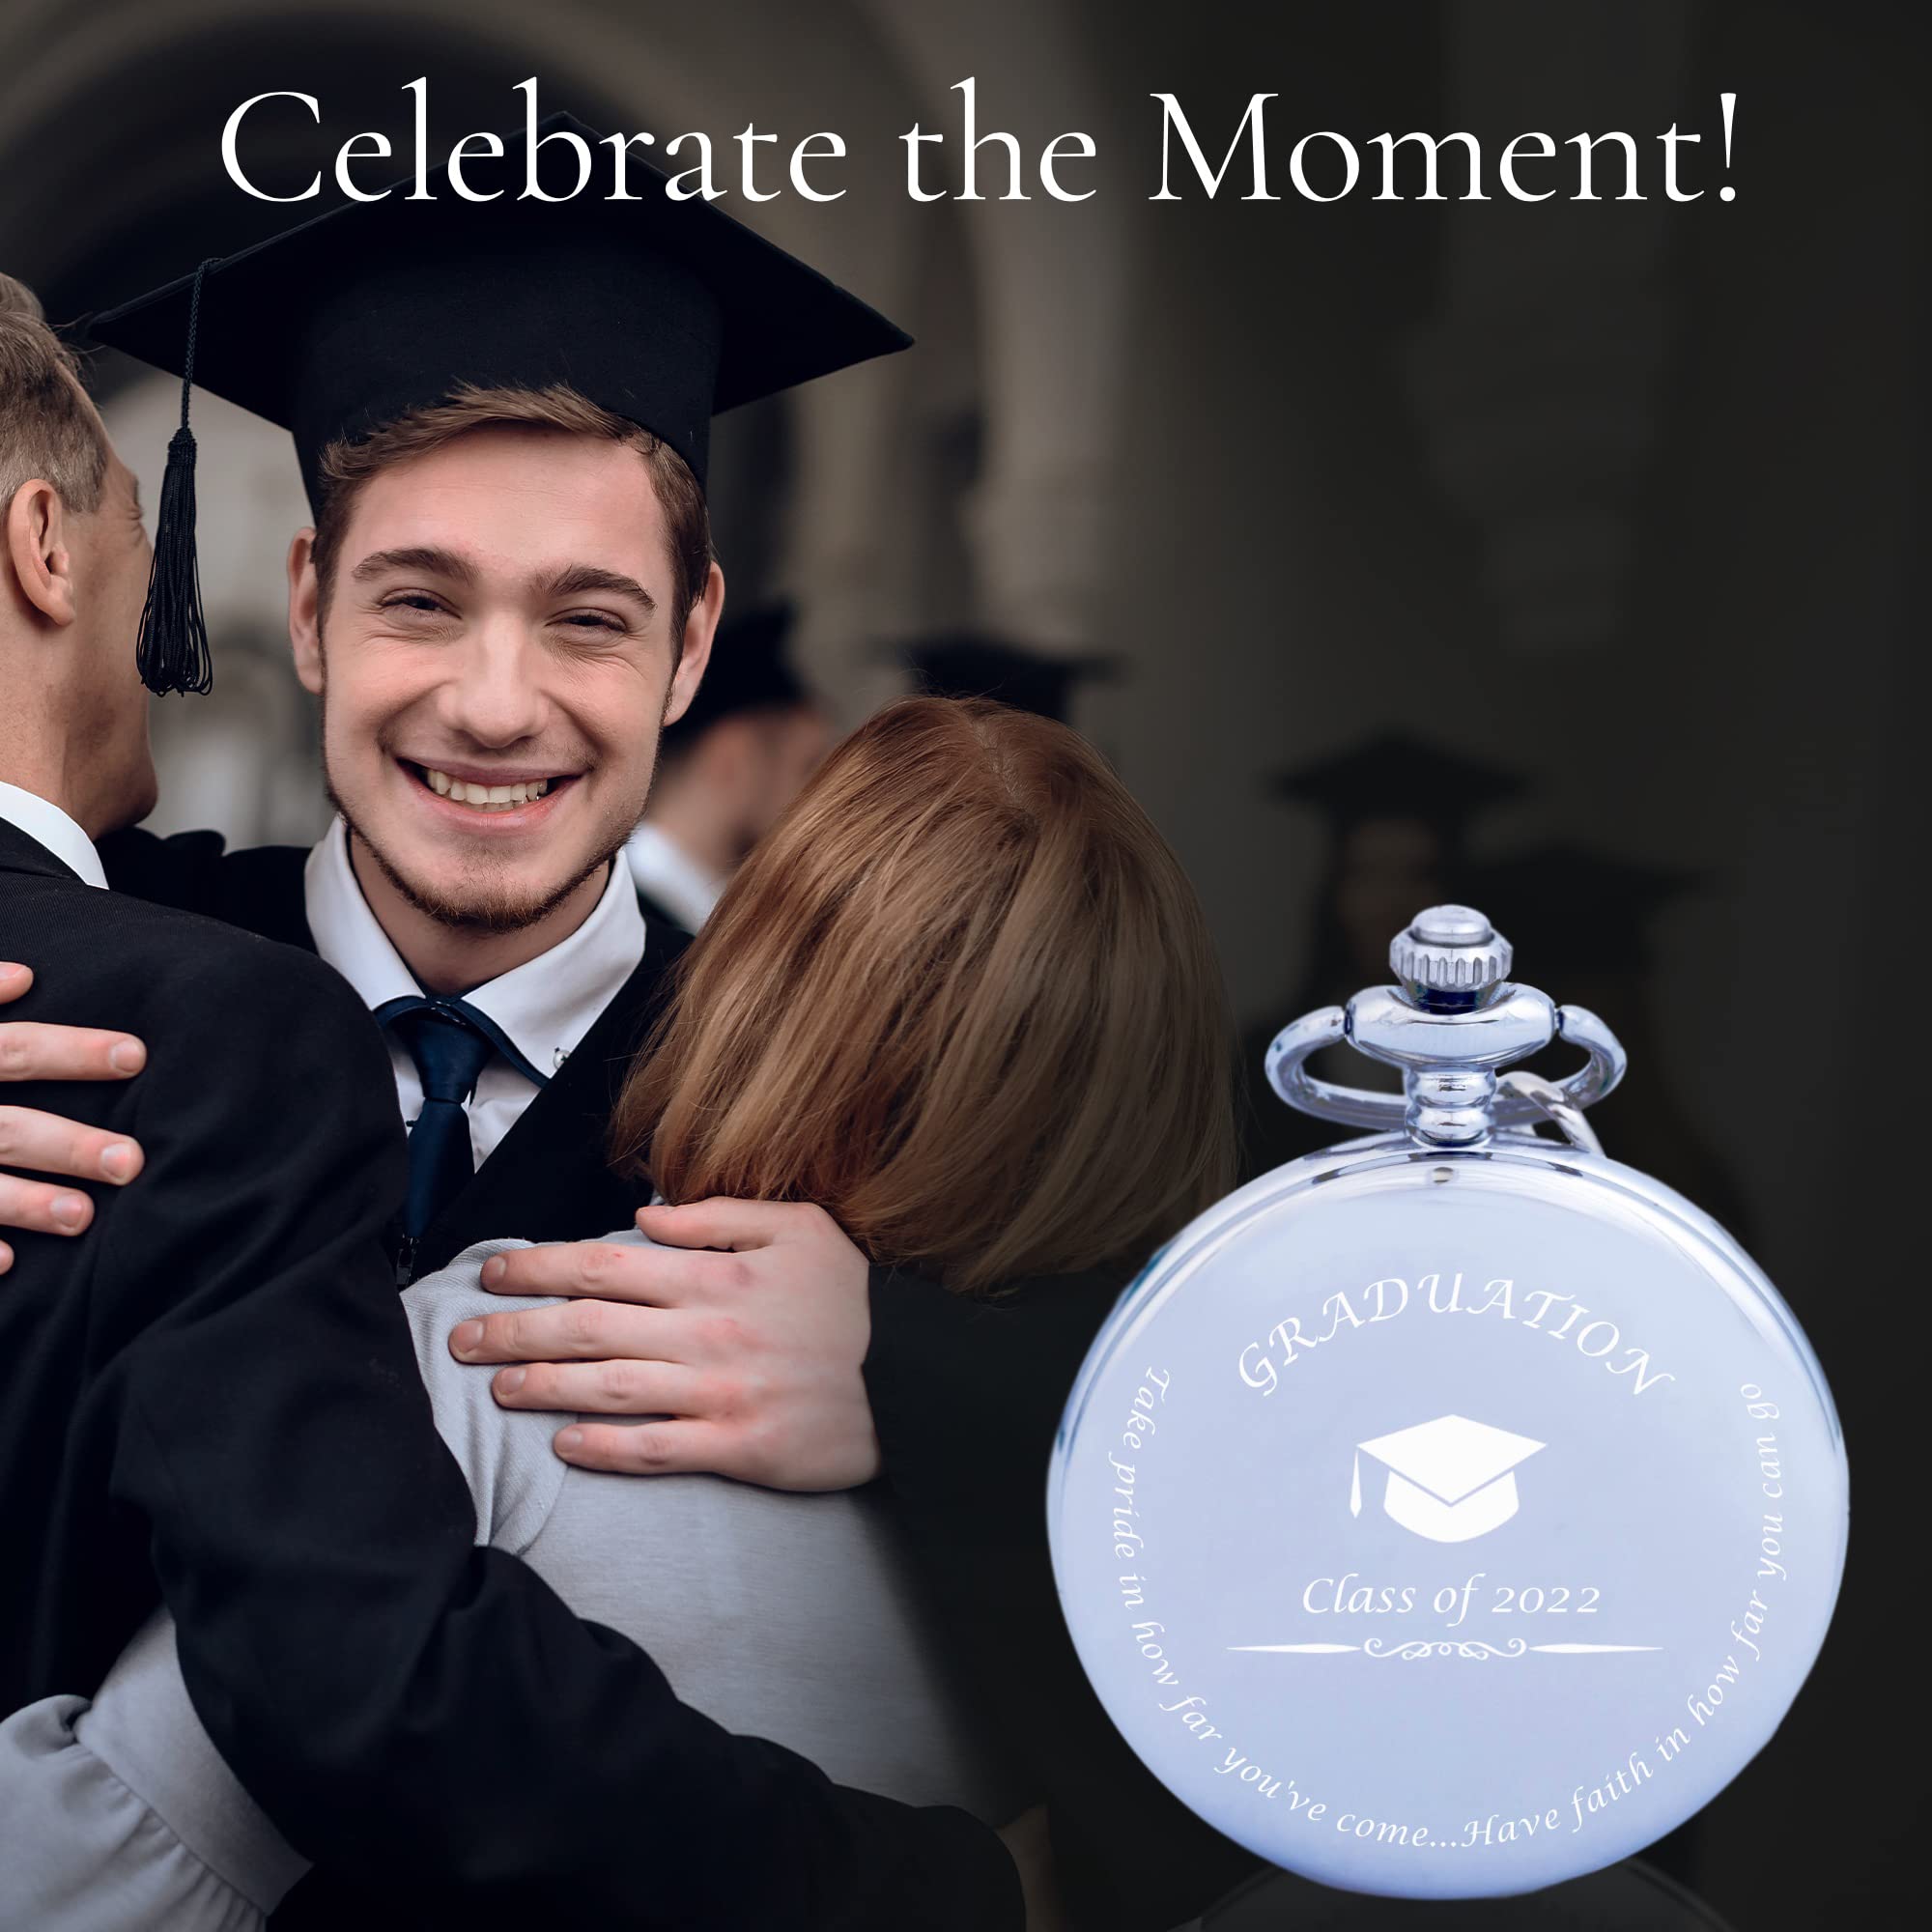 FJ FREDERICK JAMES Graduation Gifts for Him 2023 - Silver Pocket Watch - Engraved ‘Class of 2023’ – Perfect College Graduation Gifts for Him I Meaningful High School Graduation Gifts for Boys/Son